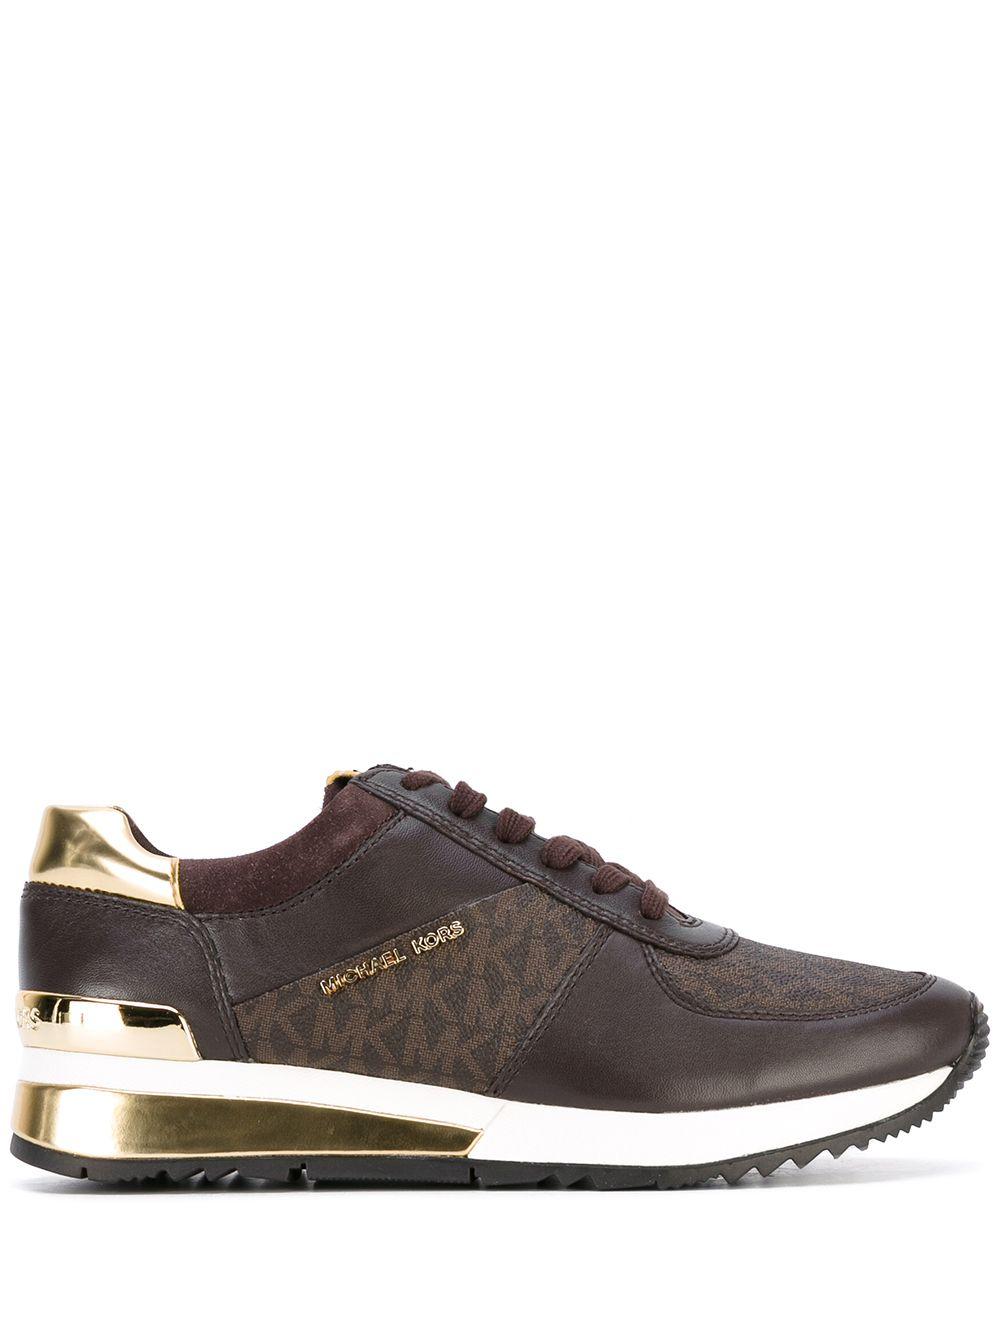 Michael Michael Kors Outlet sneakers for man  Black  Michael Michael  Kors sneakers 42F9MIFS2S online on GIGLIOCOM